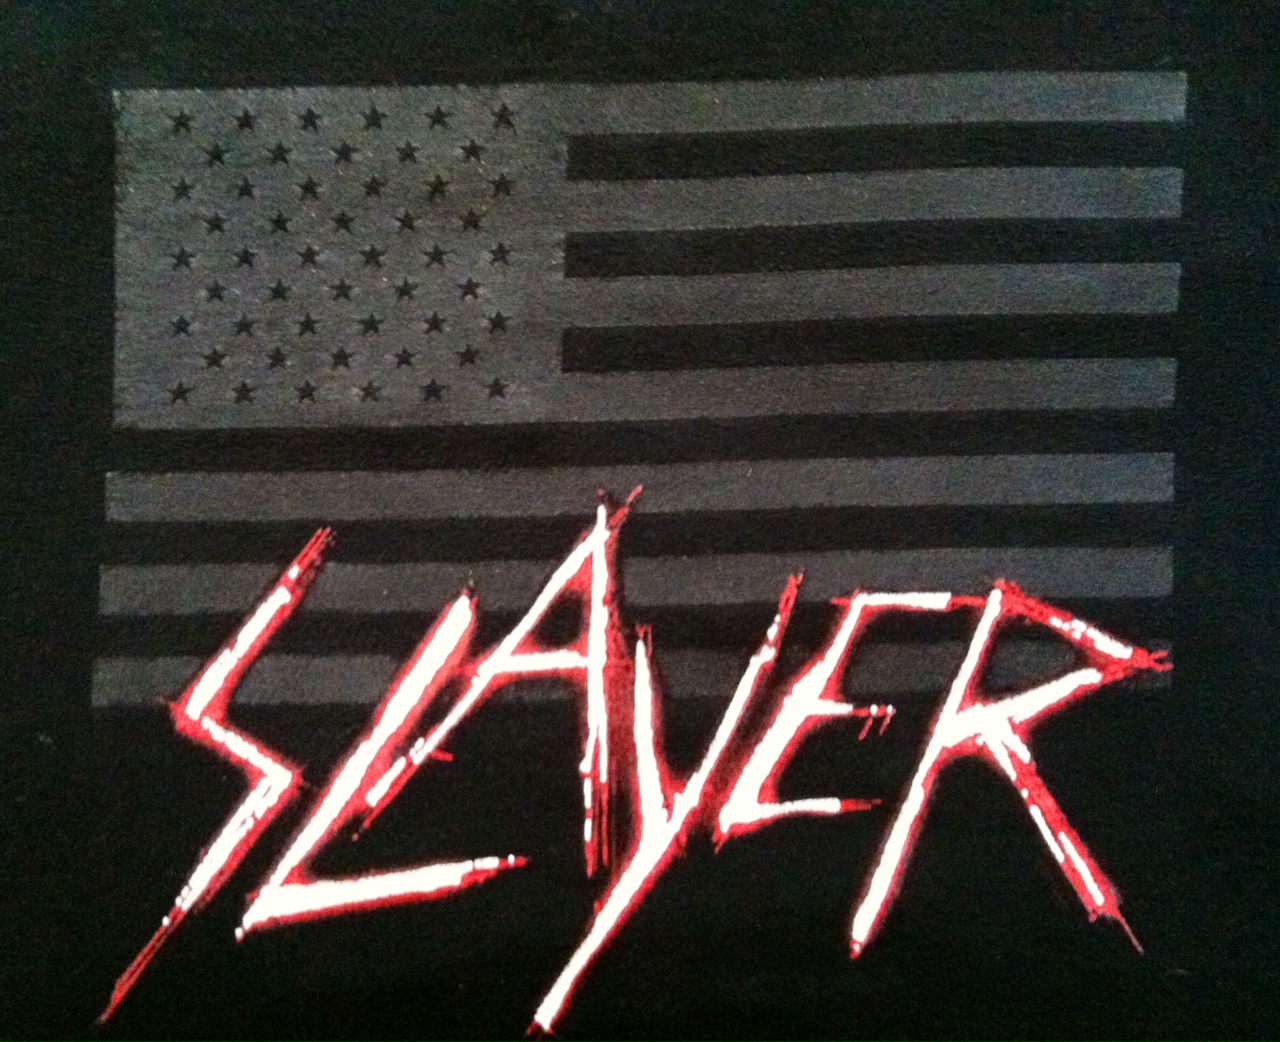 Slayer shirt from concert right after 911